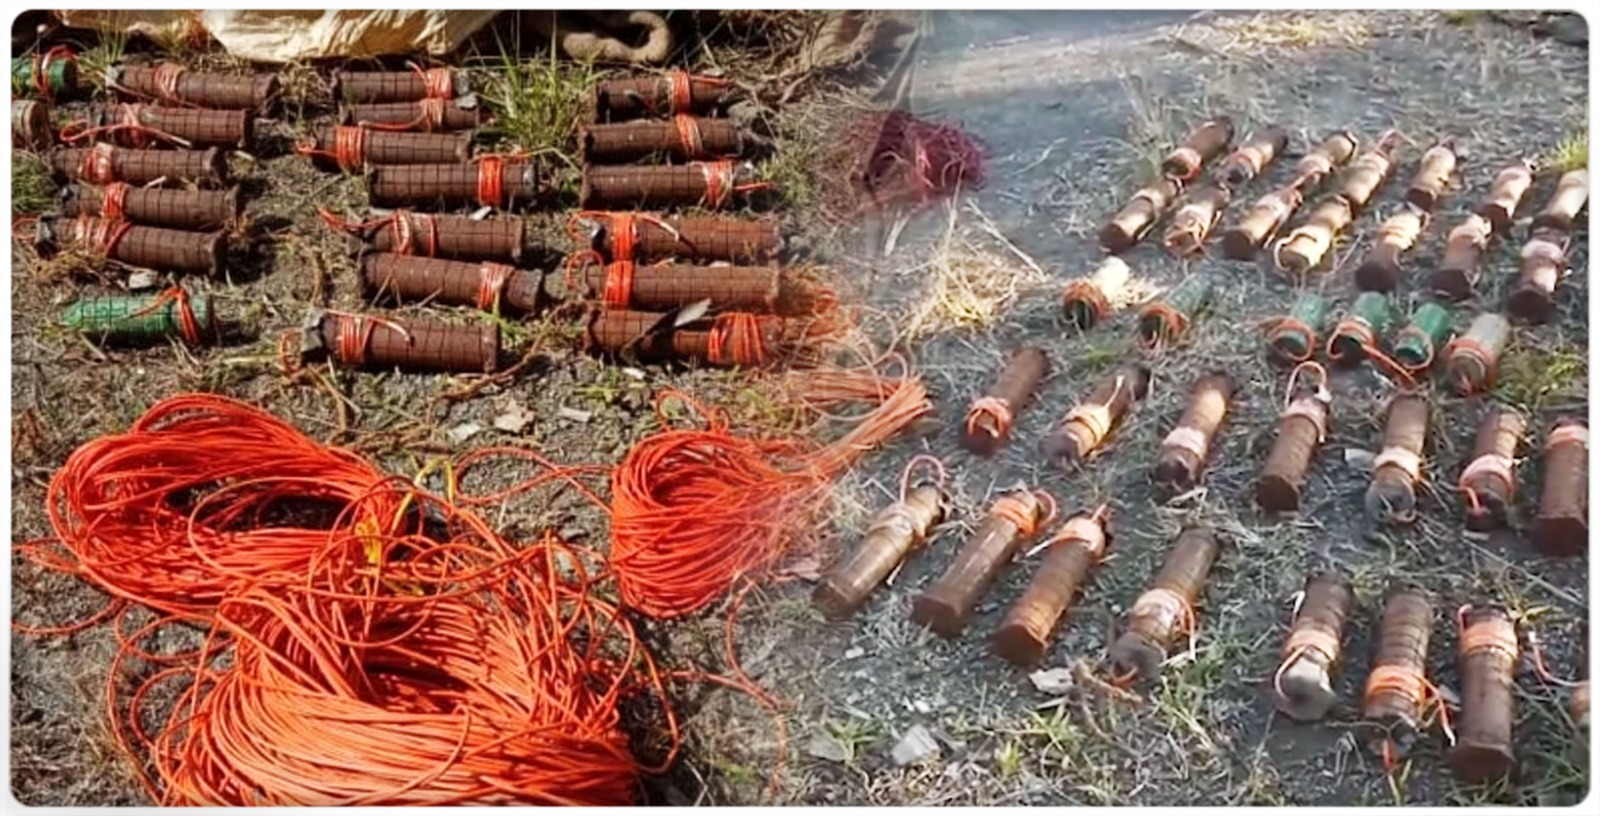 At Least 45 IEDs Recovered In Manipur’s Tengnoupal